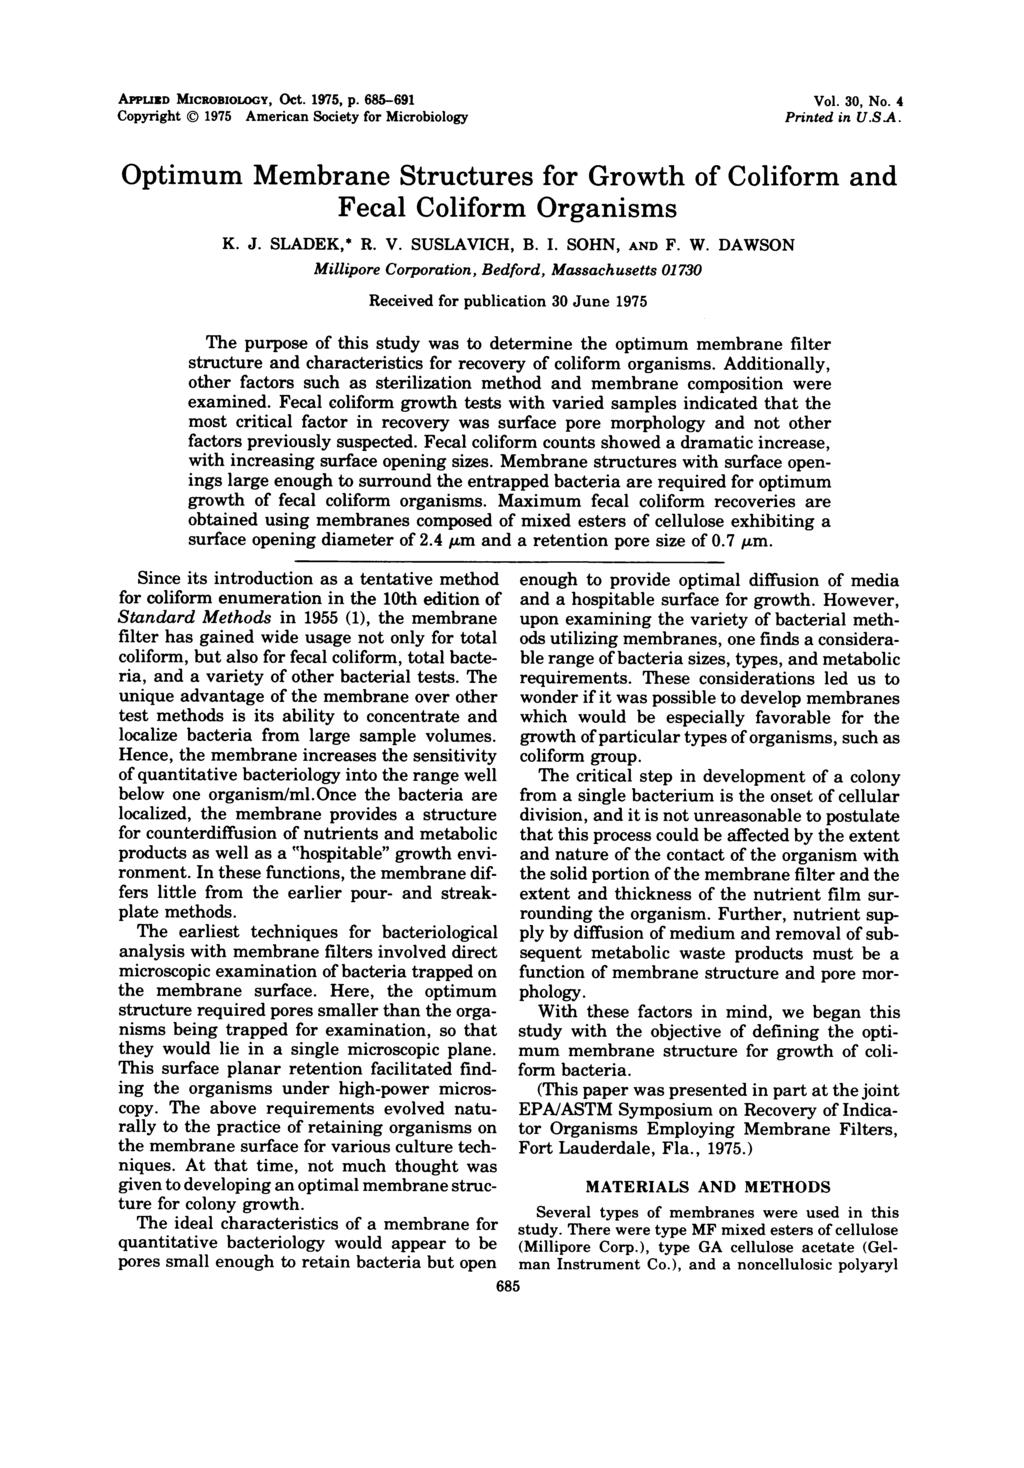 APPLIED MICROBIOLOGY, Oct. 1975, p. 685-691 Copyright i 1975 American Society for Microbiology Vol. 3, No. 4 Printed in U.SA.